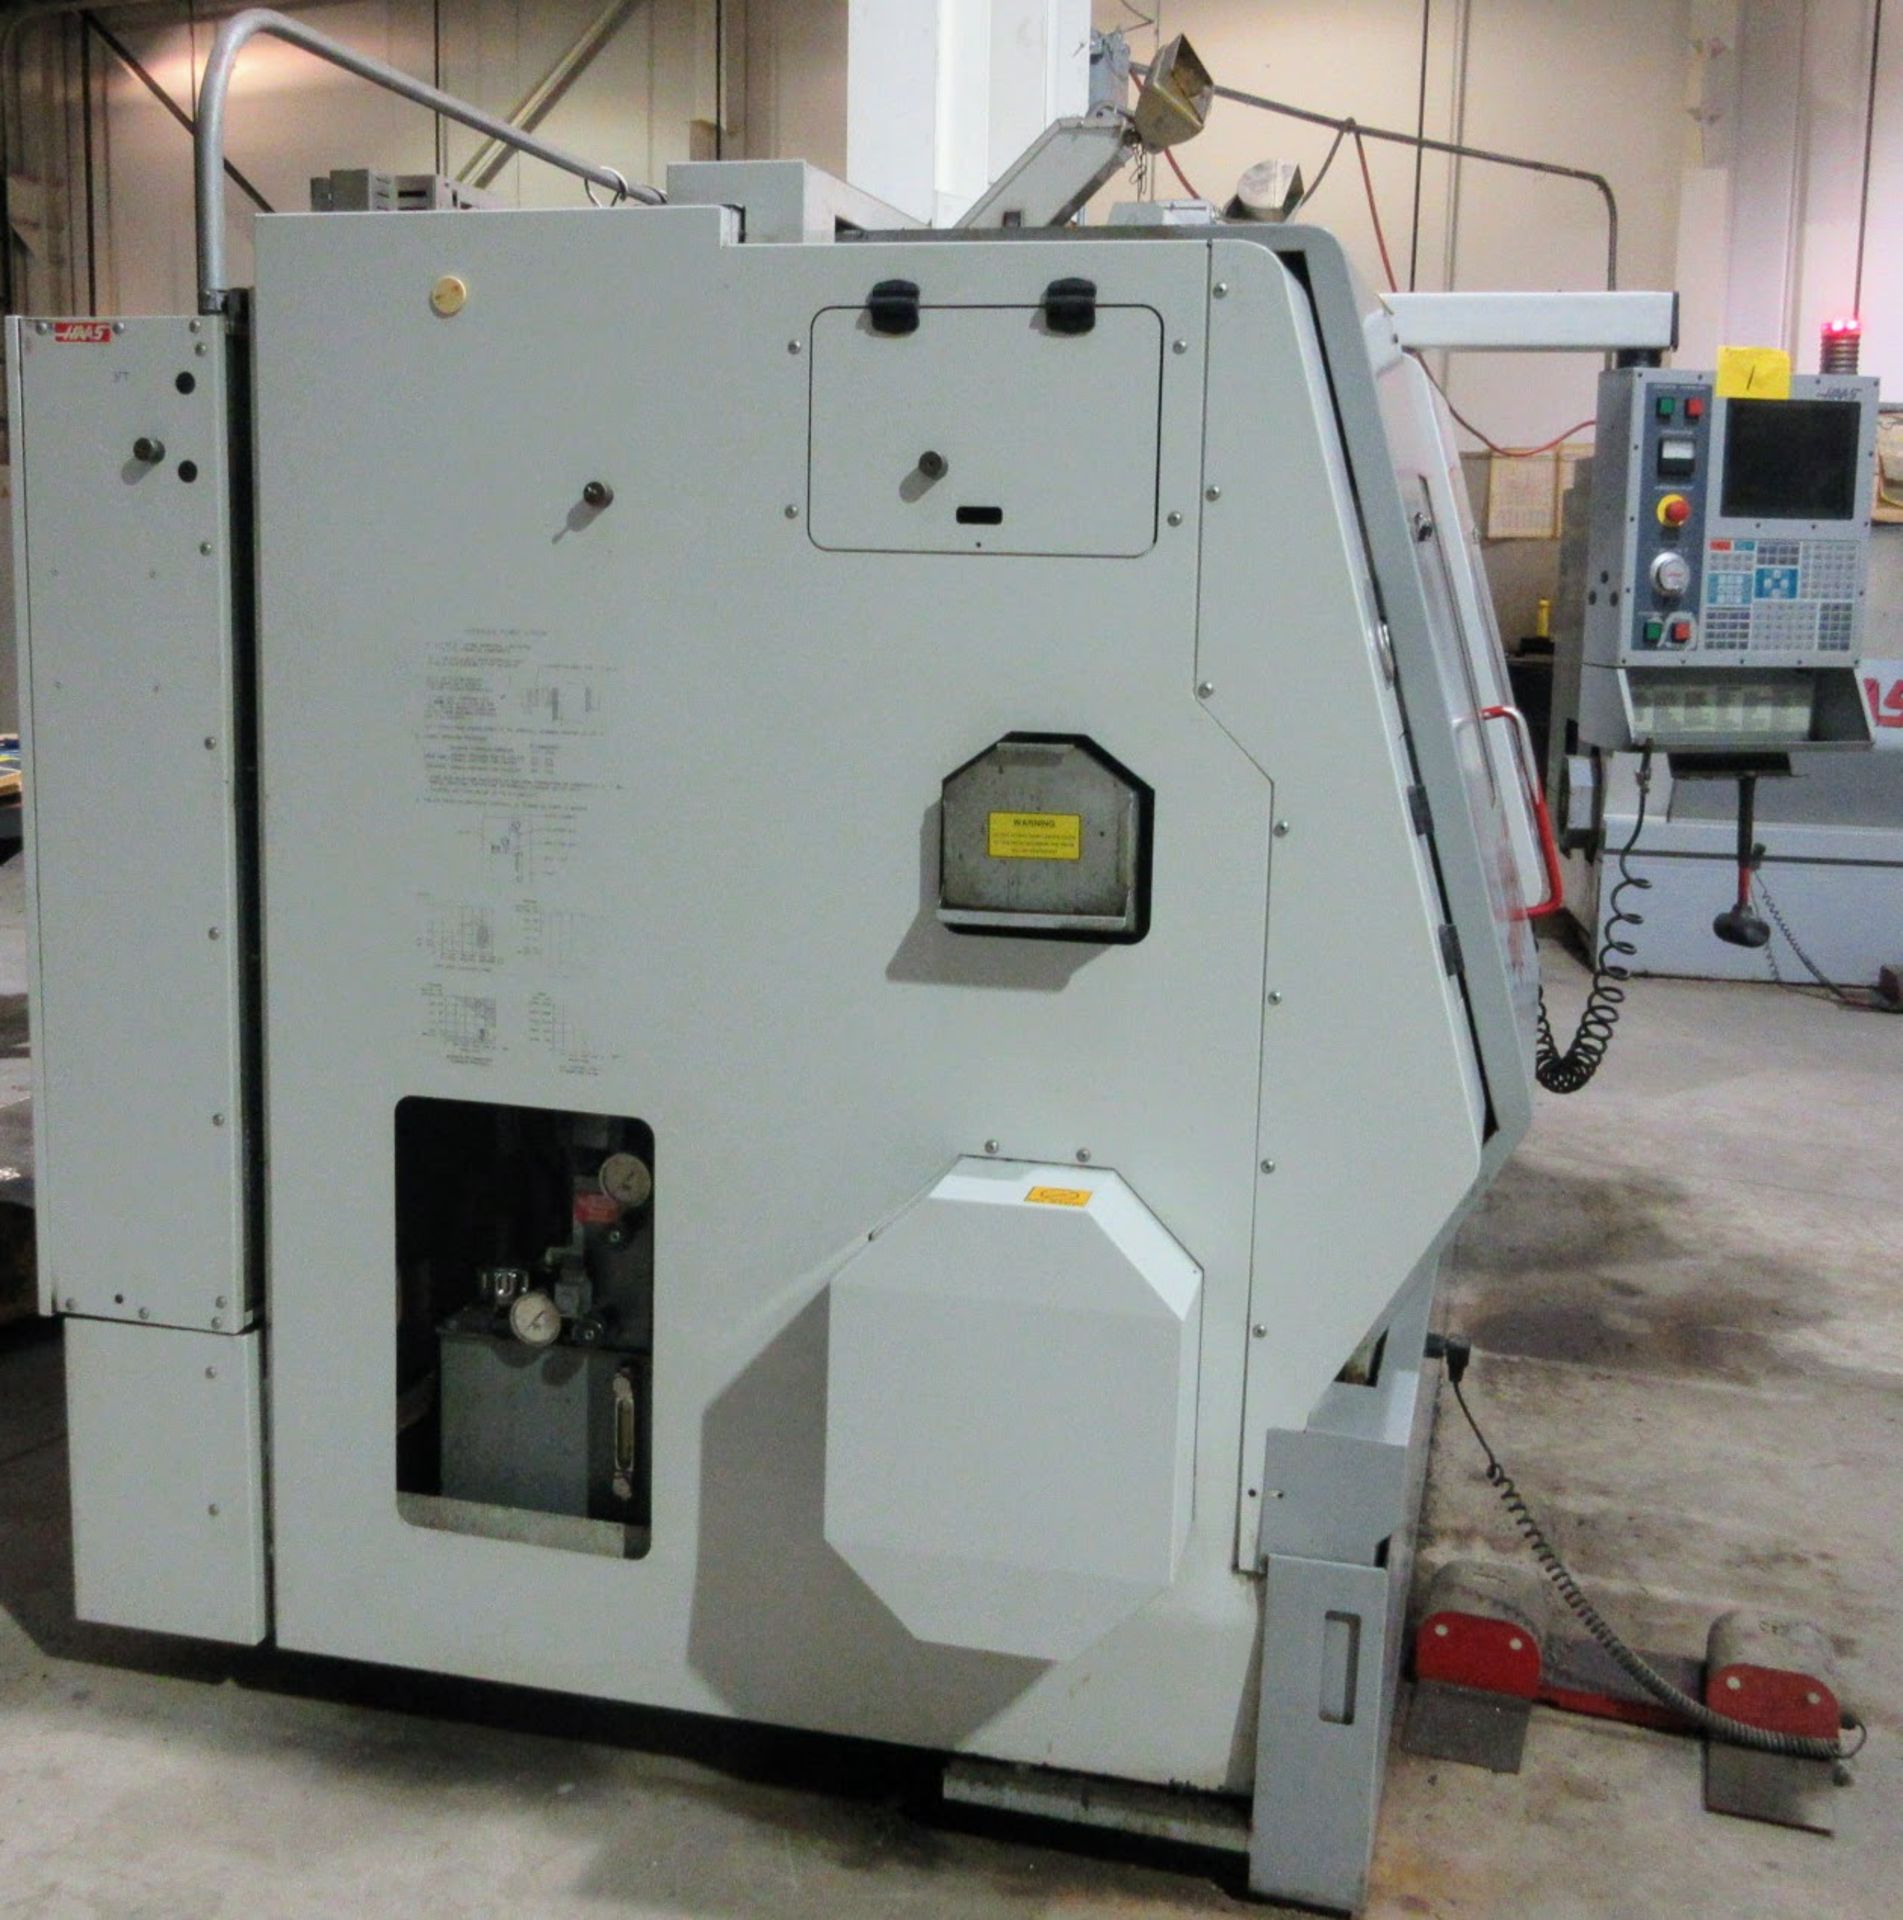 2002 HAAS SL-30T CNC LATHE, S/N 64801, CNC CONTROL, 10” 3-JAW CHUCK, TOOL PRESETTER, 12-STATION - Image 18 of 20